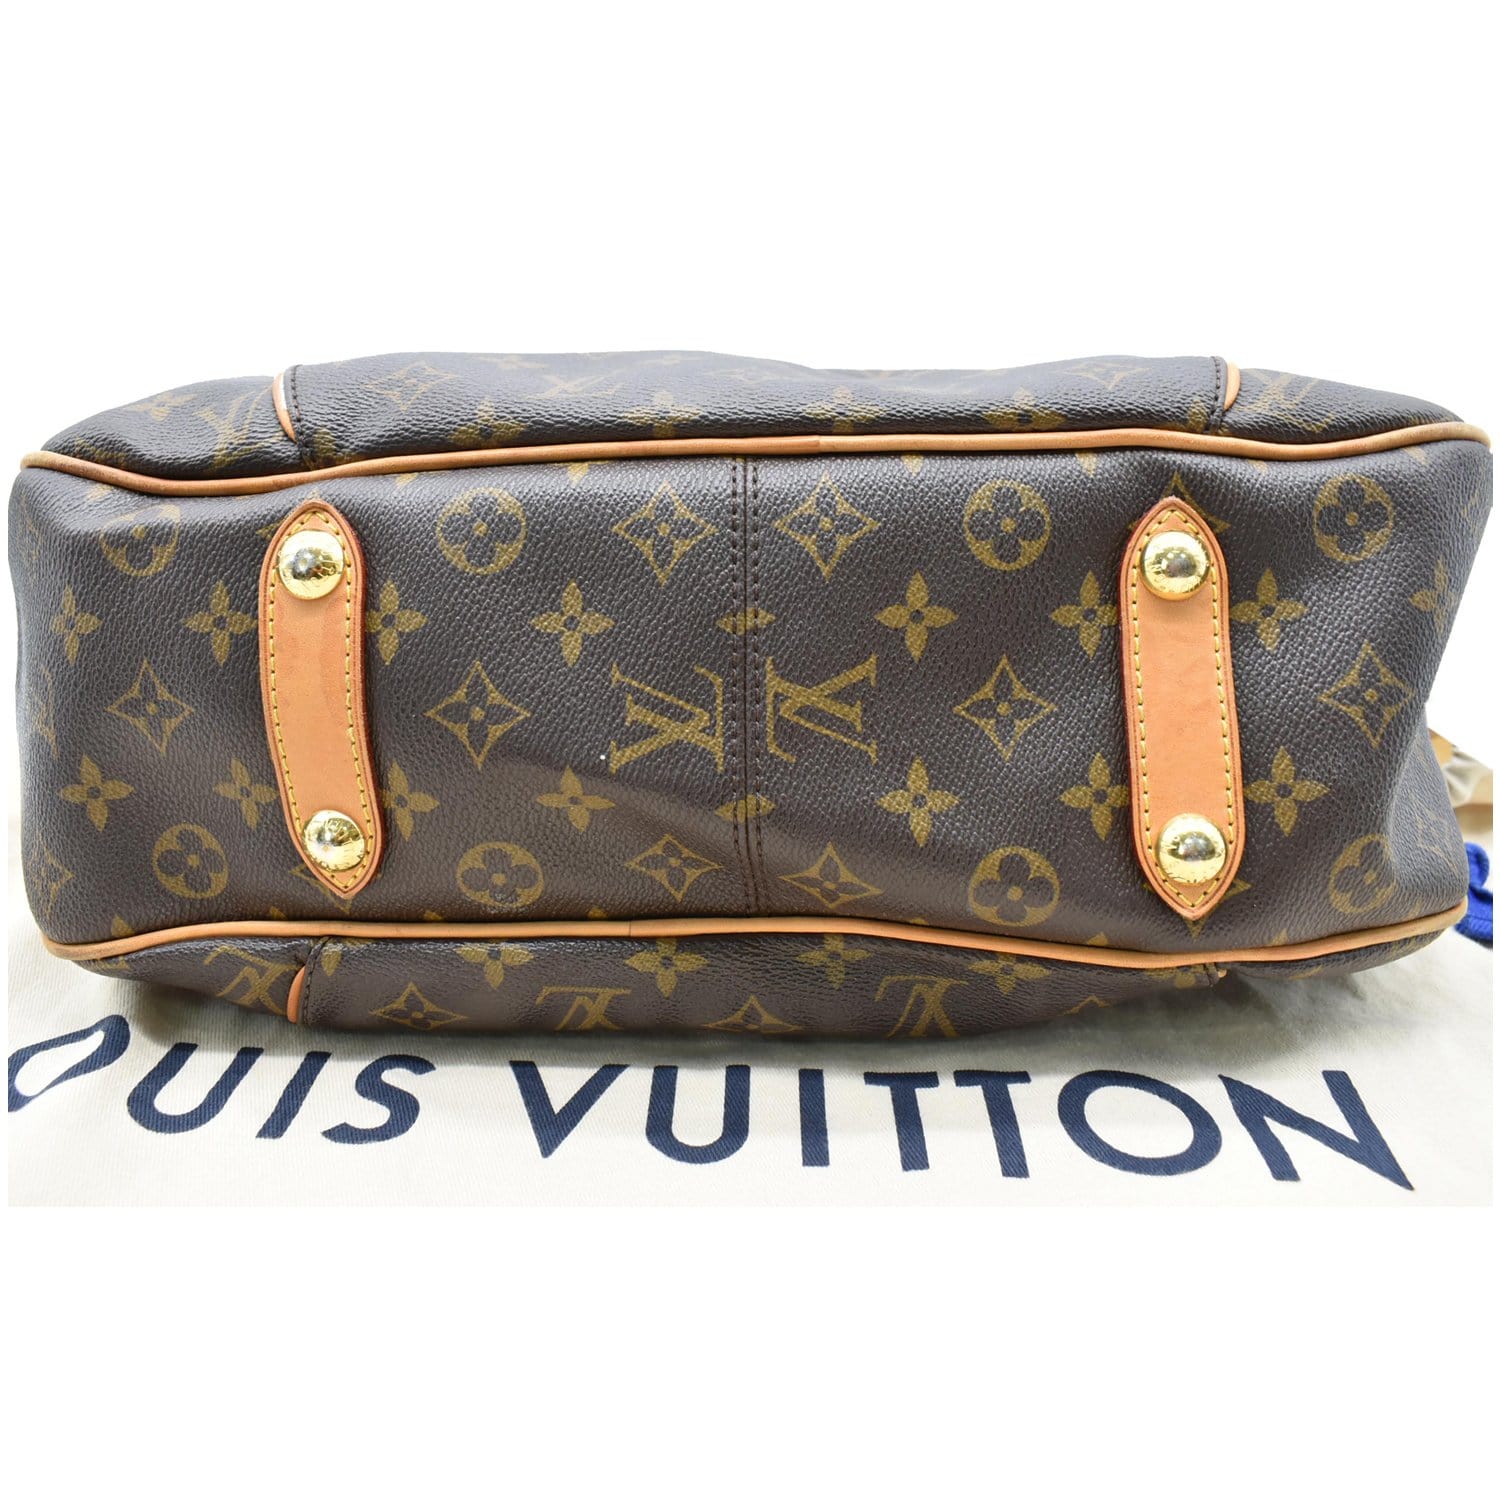 Tote Bag Organizer For Louis Vuitton Galliera PM Bag with Double Bottl